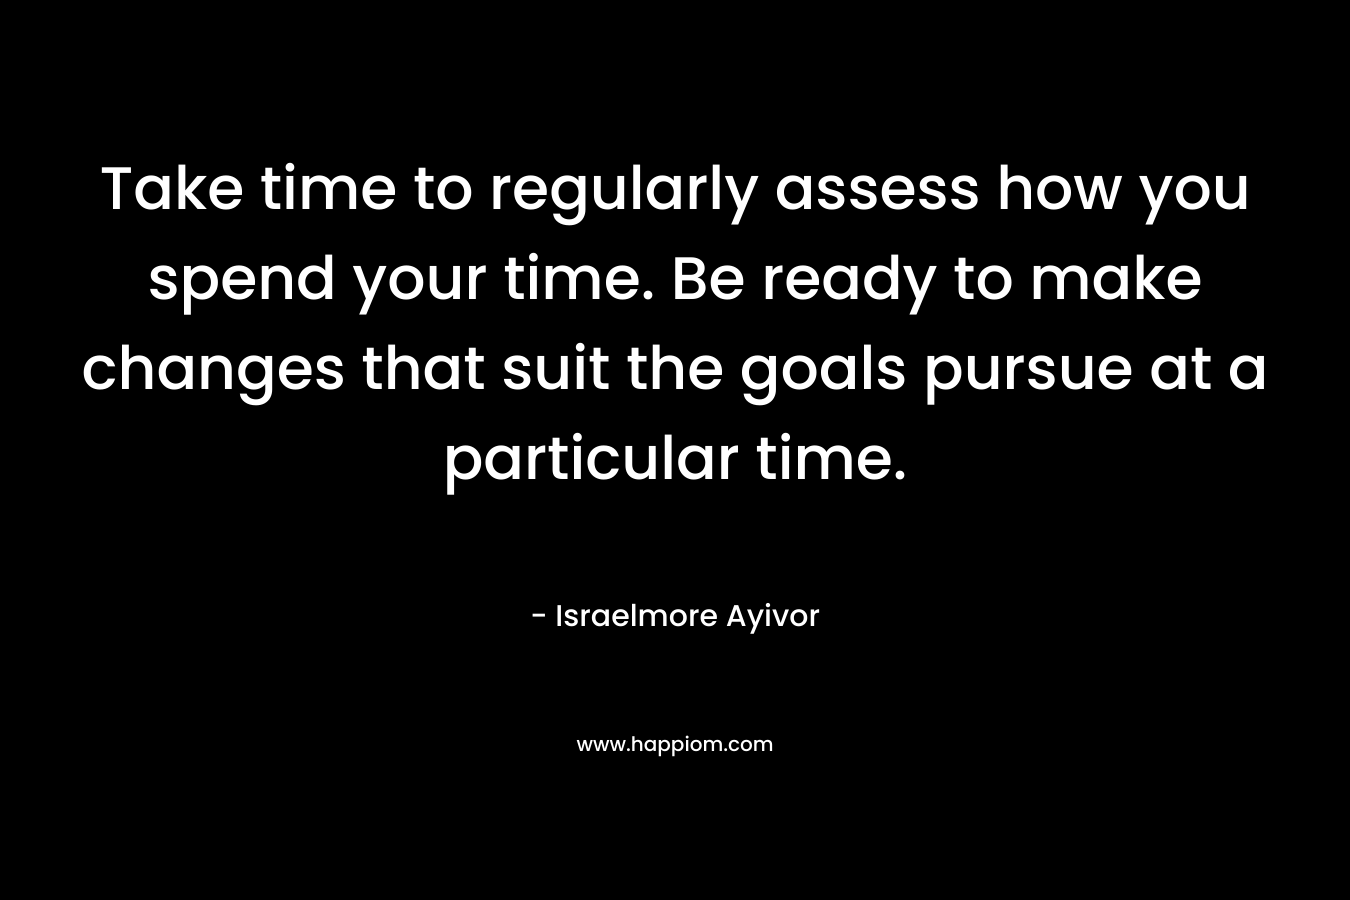 Take time to regularly assess how you spend your time. Be ready to make changes that suit the goals pursue at a particular time. – Israelmore Ayivor